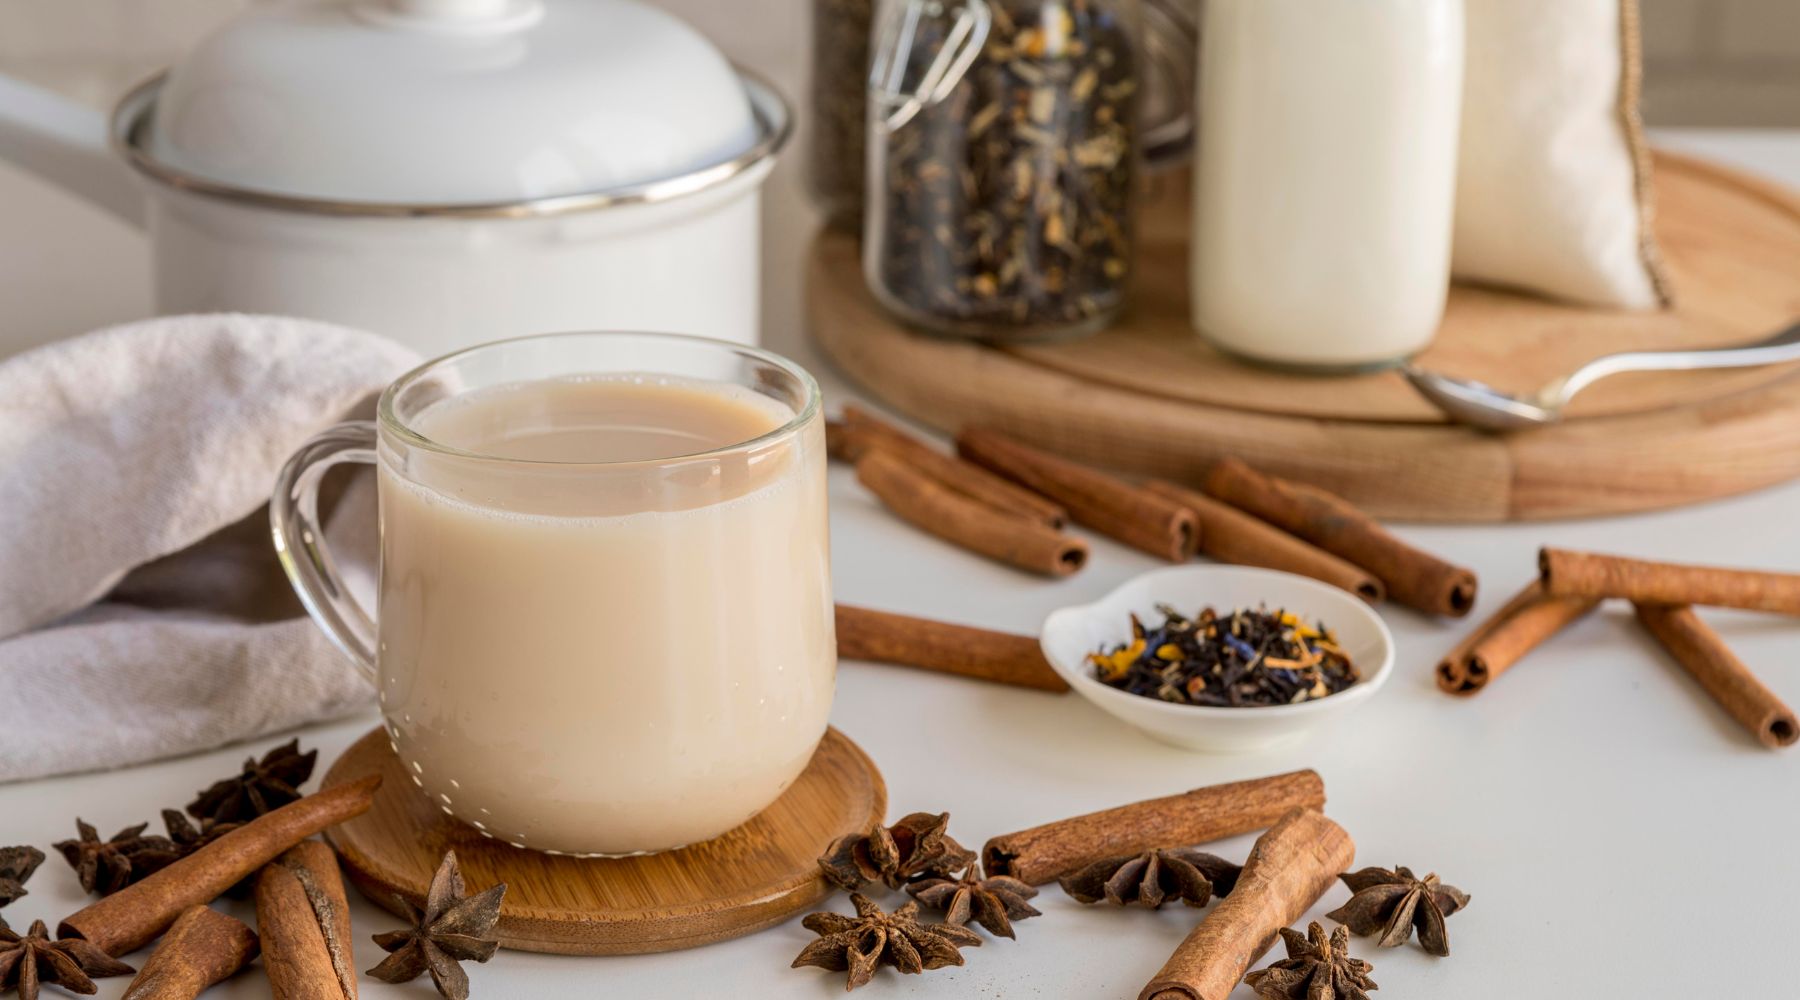 Collombatti Naturals 8 reasons to love chai this winter blog -  A mug of chai in a clear glass mug on a wooden coaster with chai spices scattered around the mug